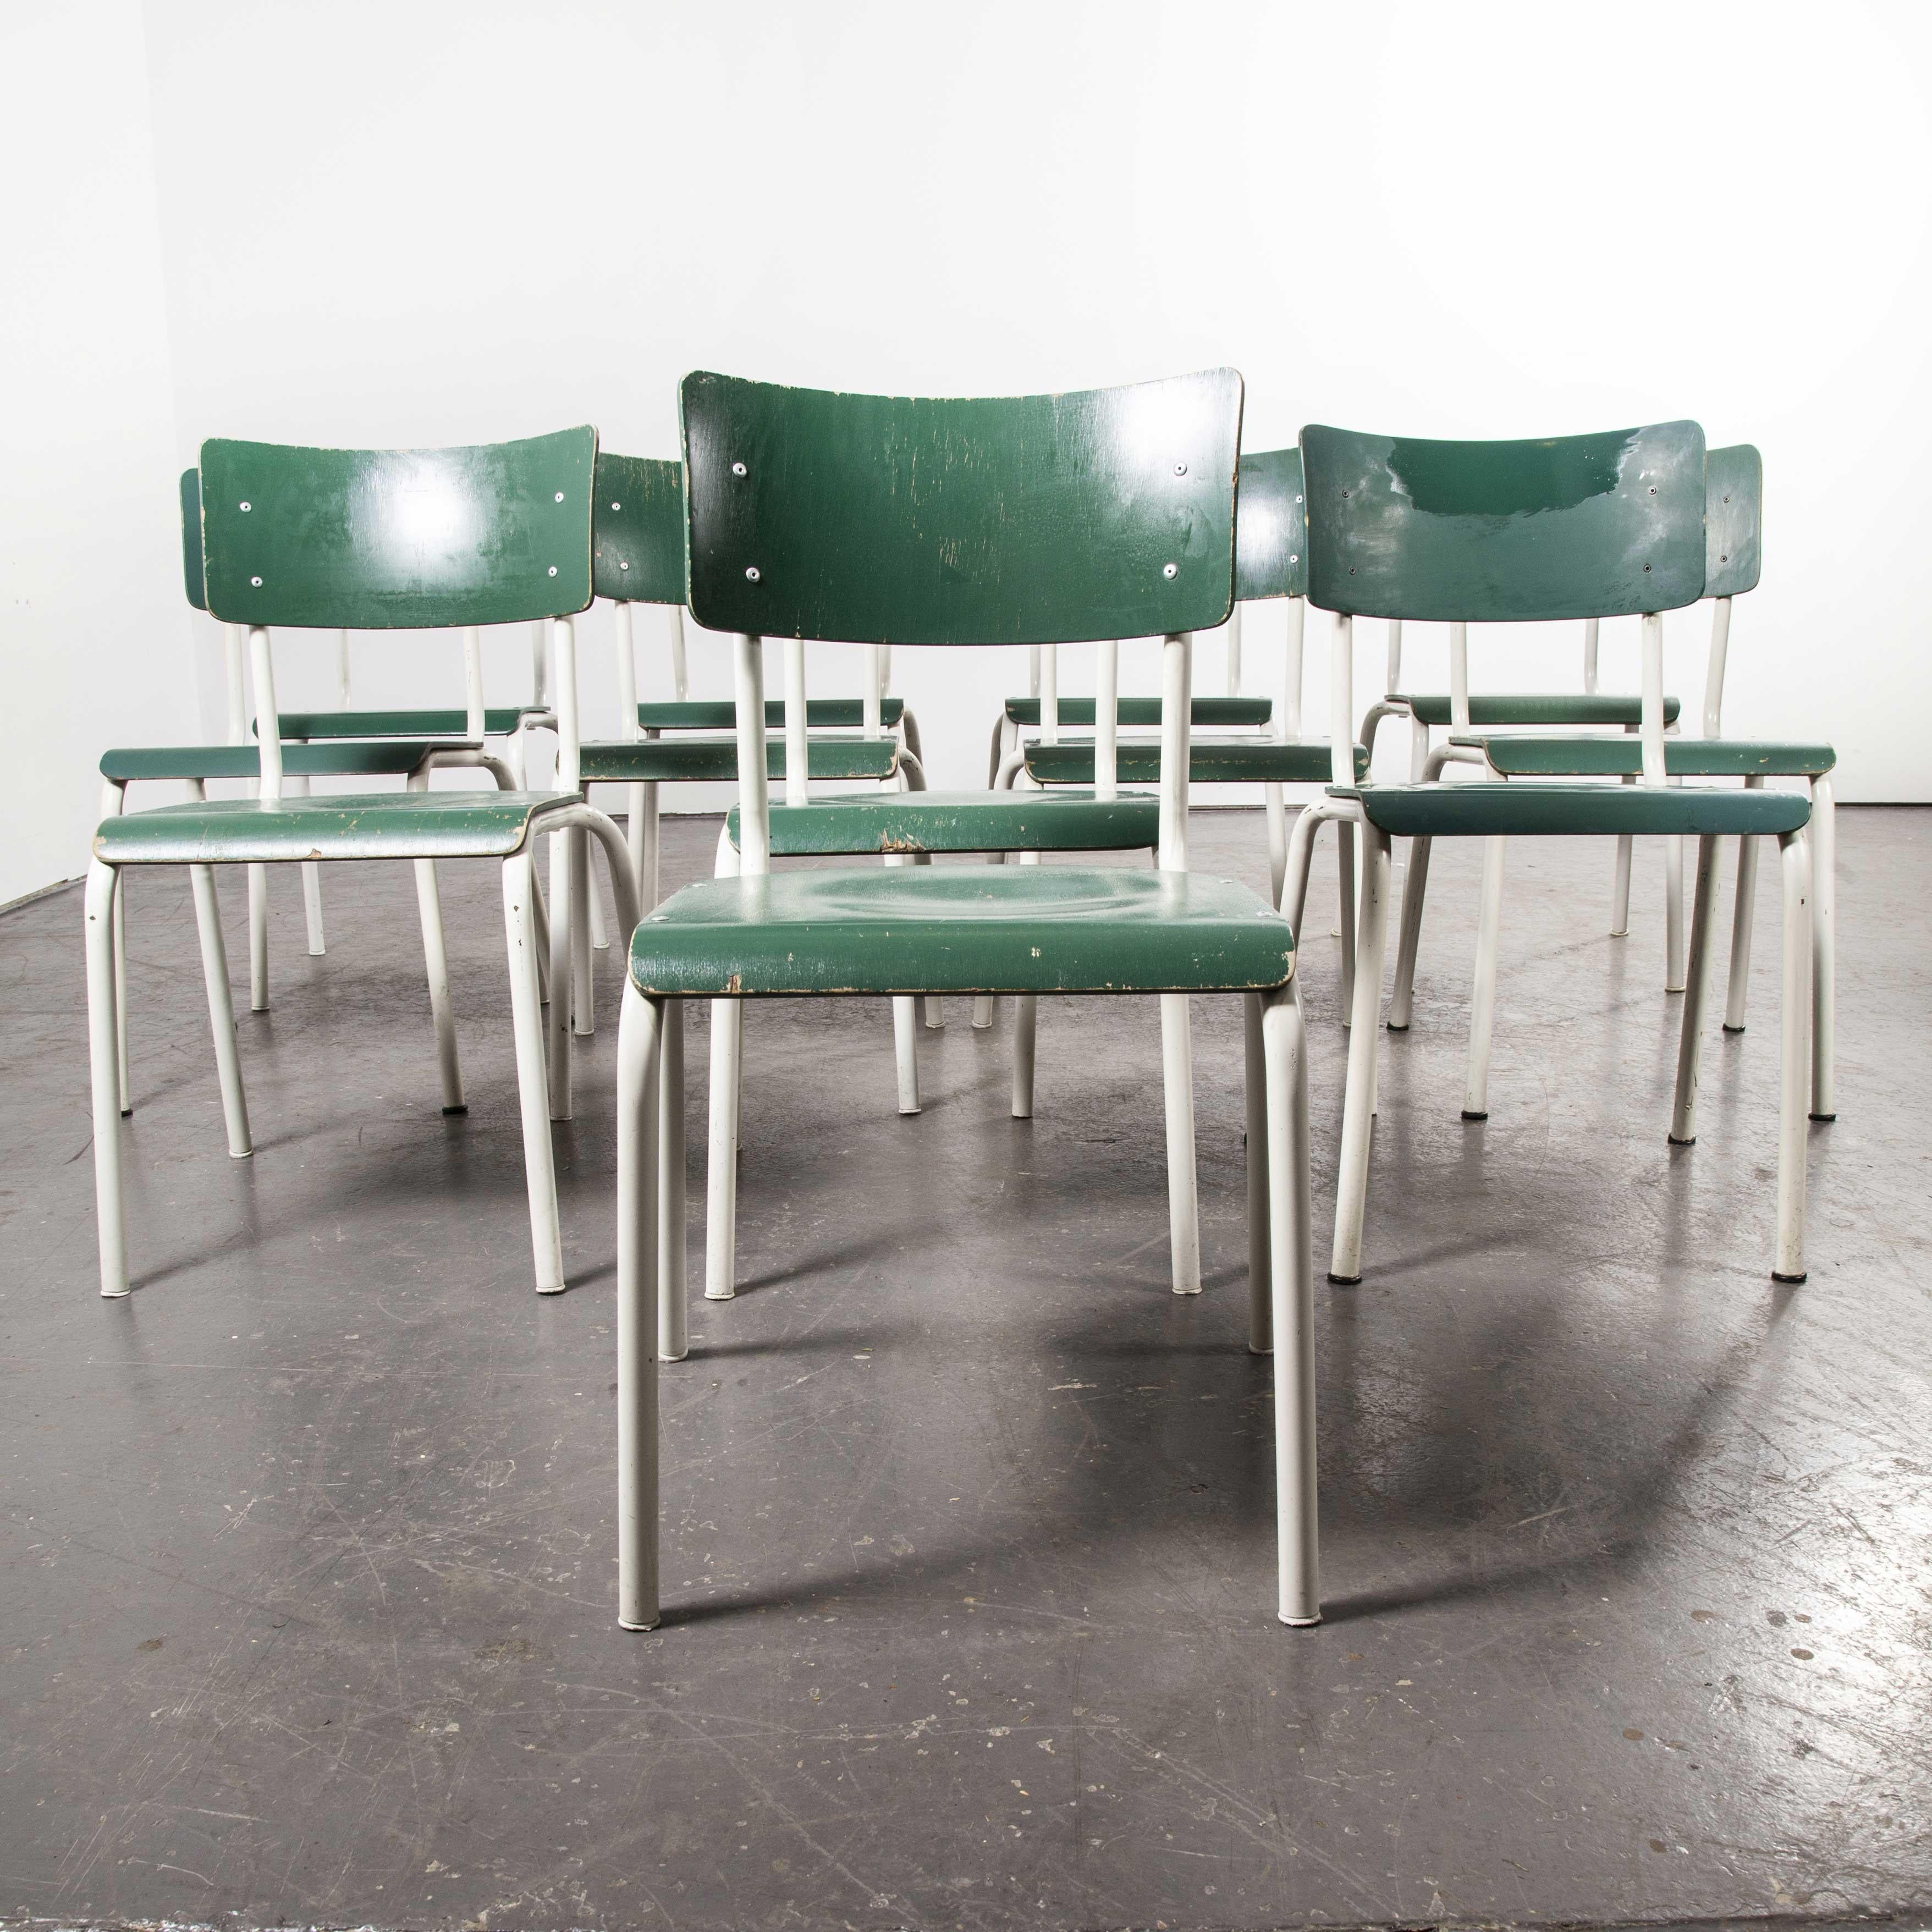 Late 20th Century 1970s Thonet Stacking Dining Chairs for the German Army, Green, Set of Twelve